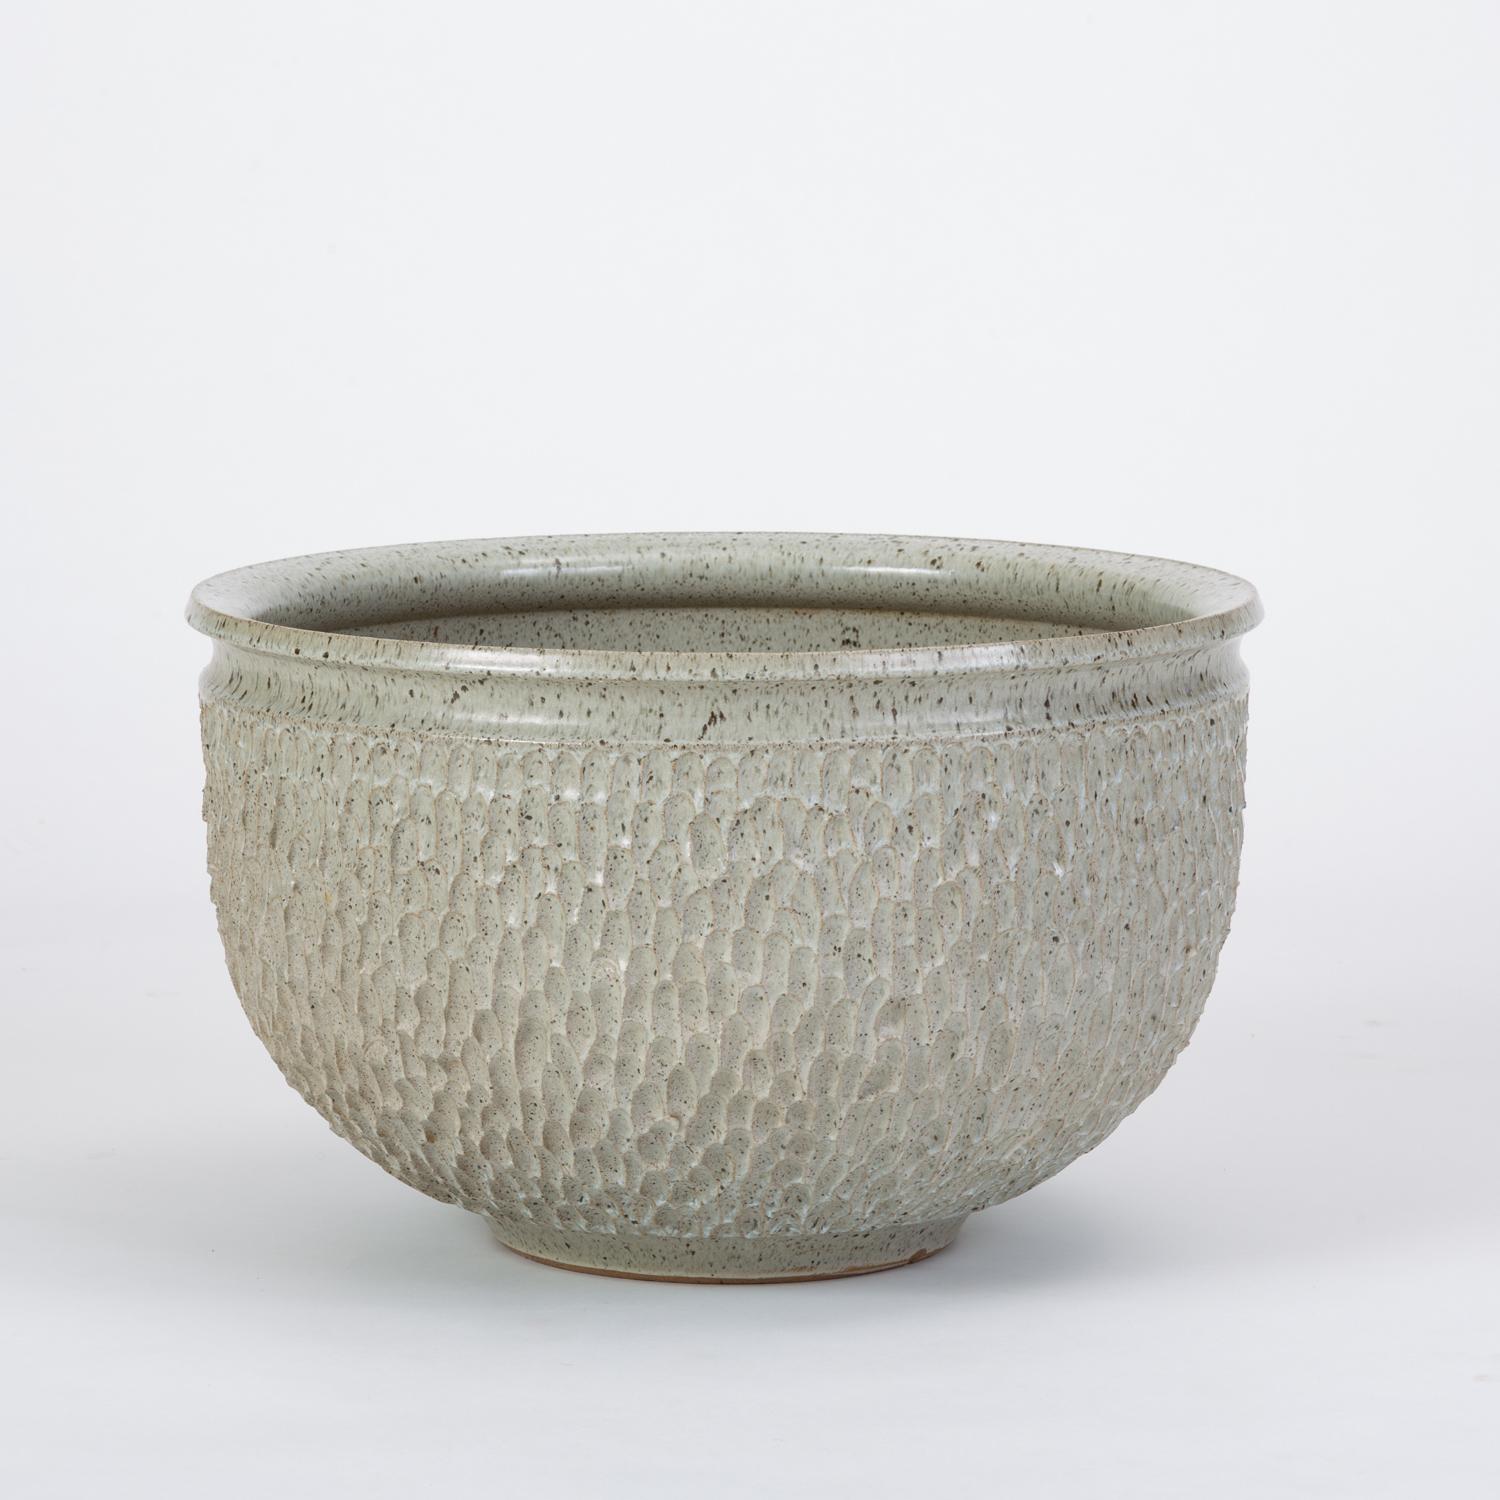 American Earthgender ‘Pebble’ Textured Bowl Planter by David Cressey and Robert Maxwell